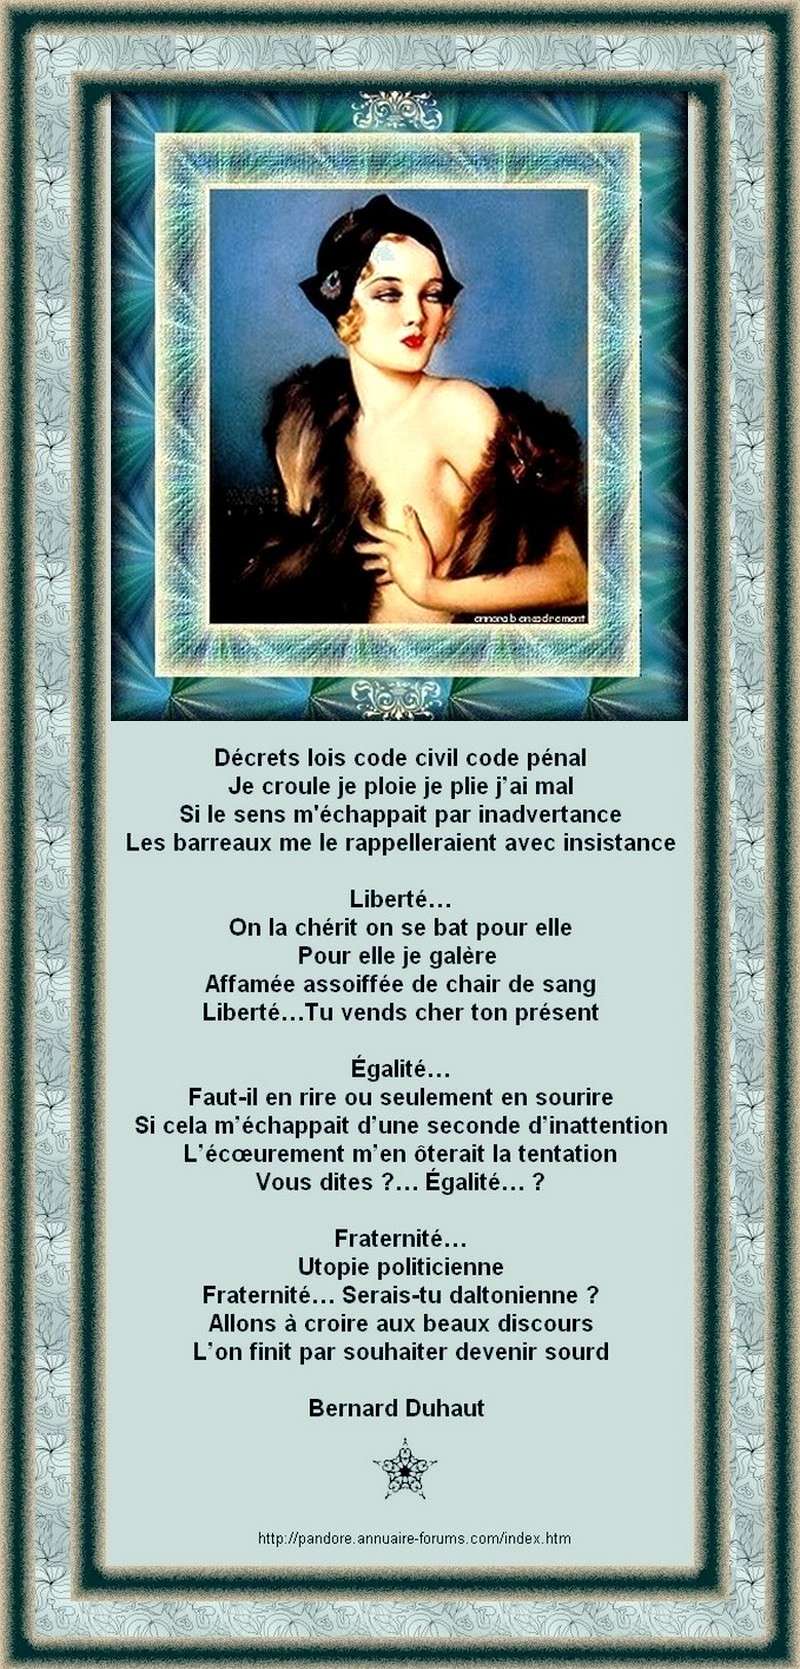 ARCHIVES DE POESIES ET TEXTES N° 1 - Page 7 11aaaa21